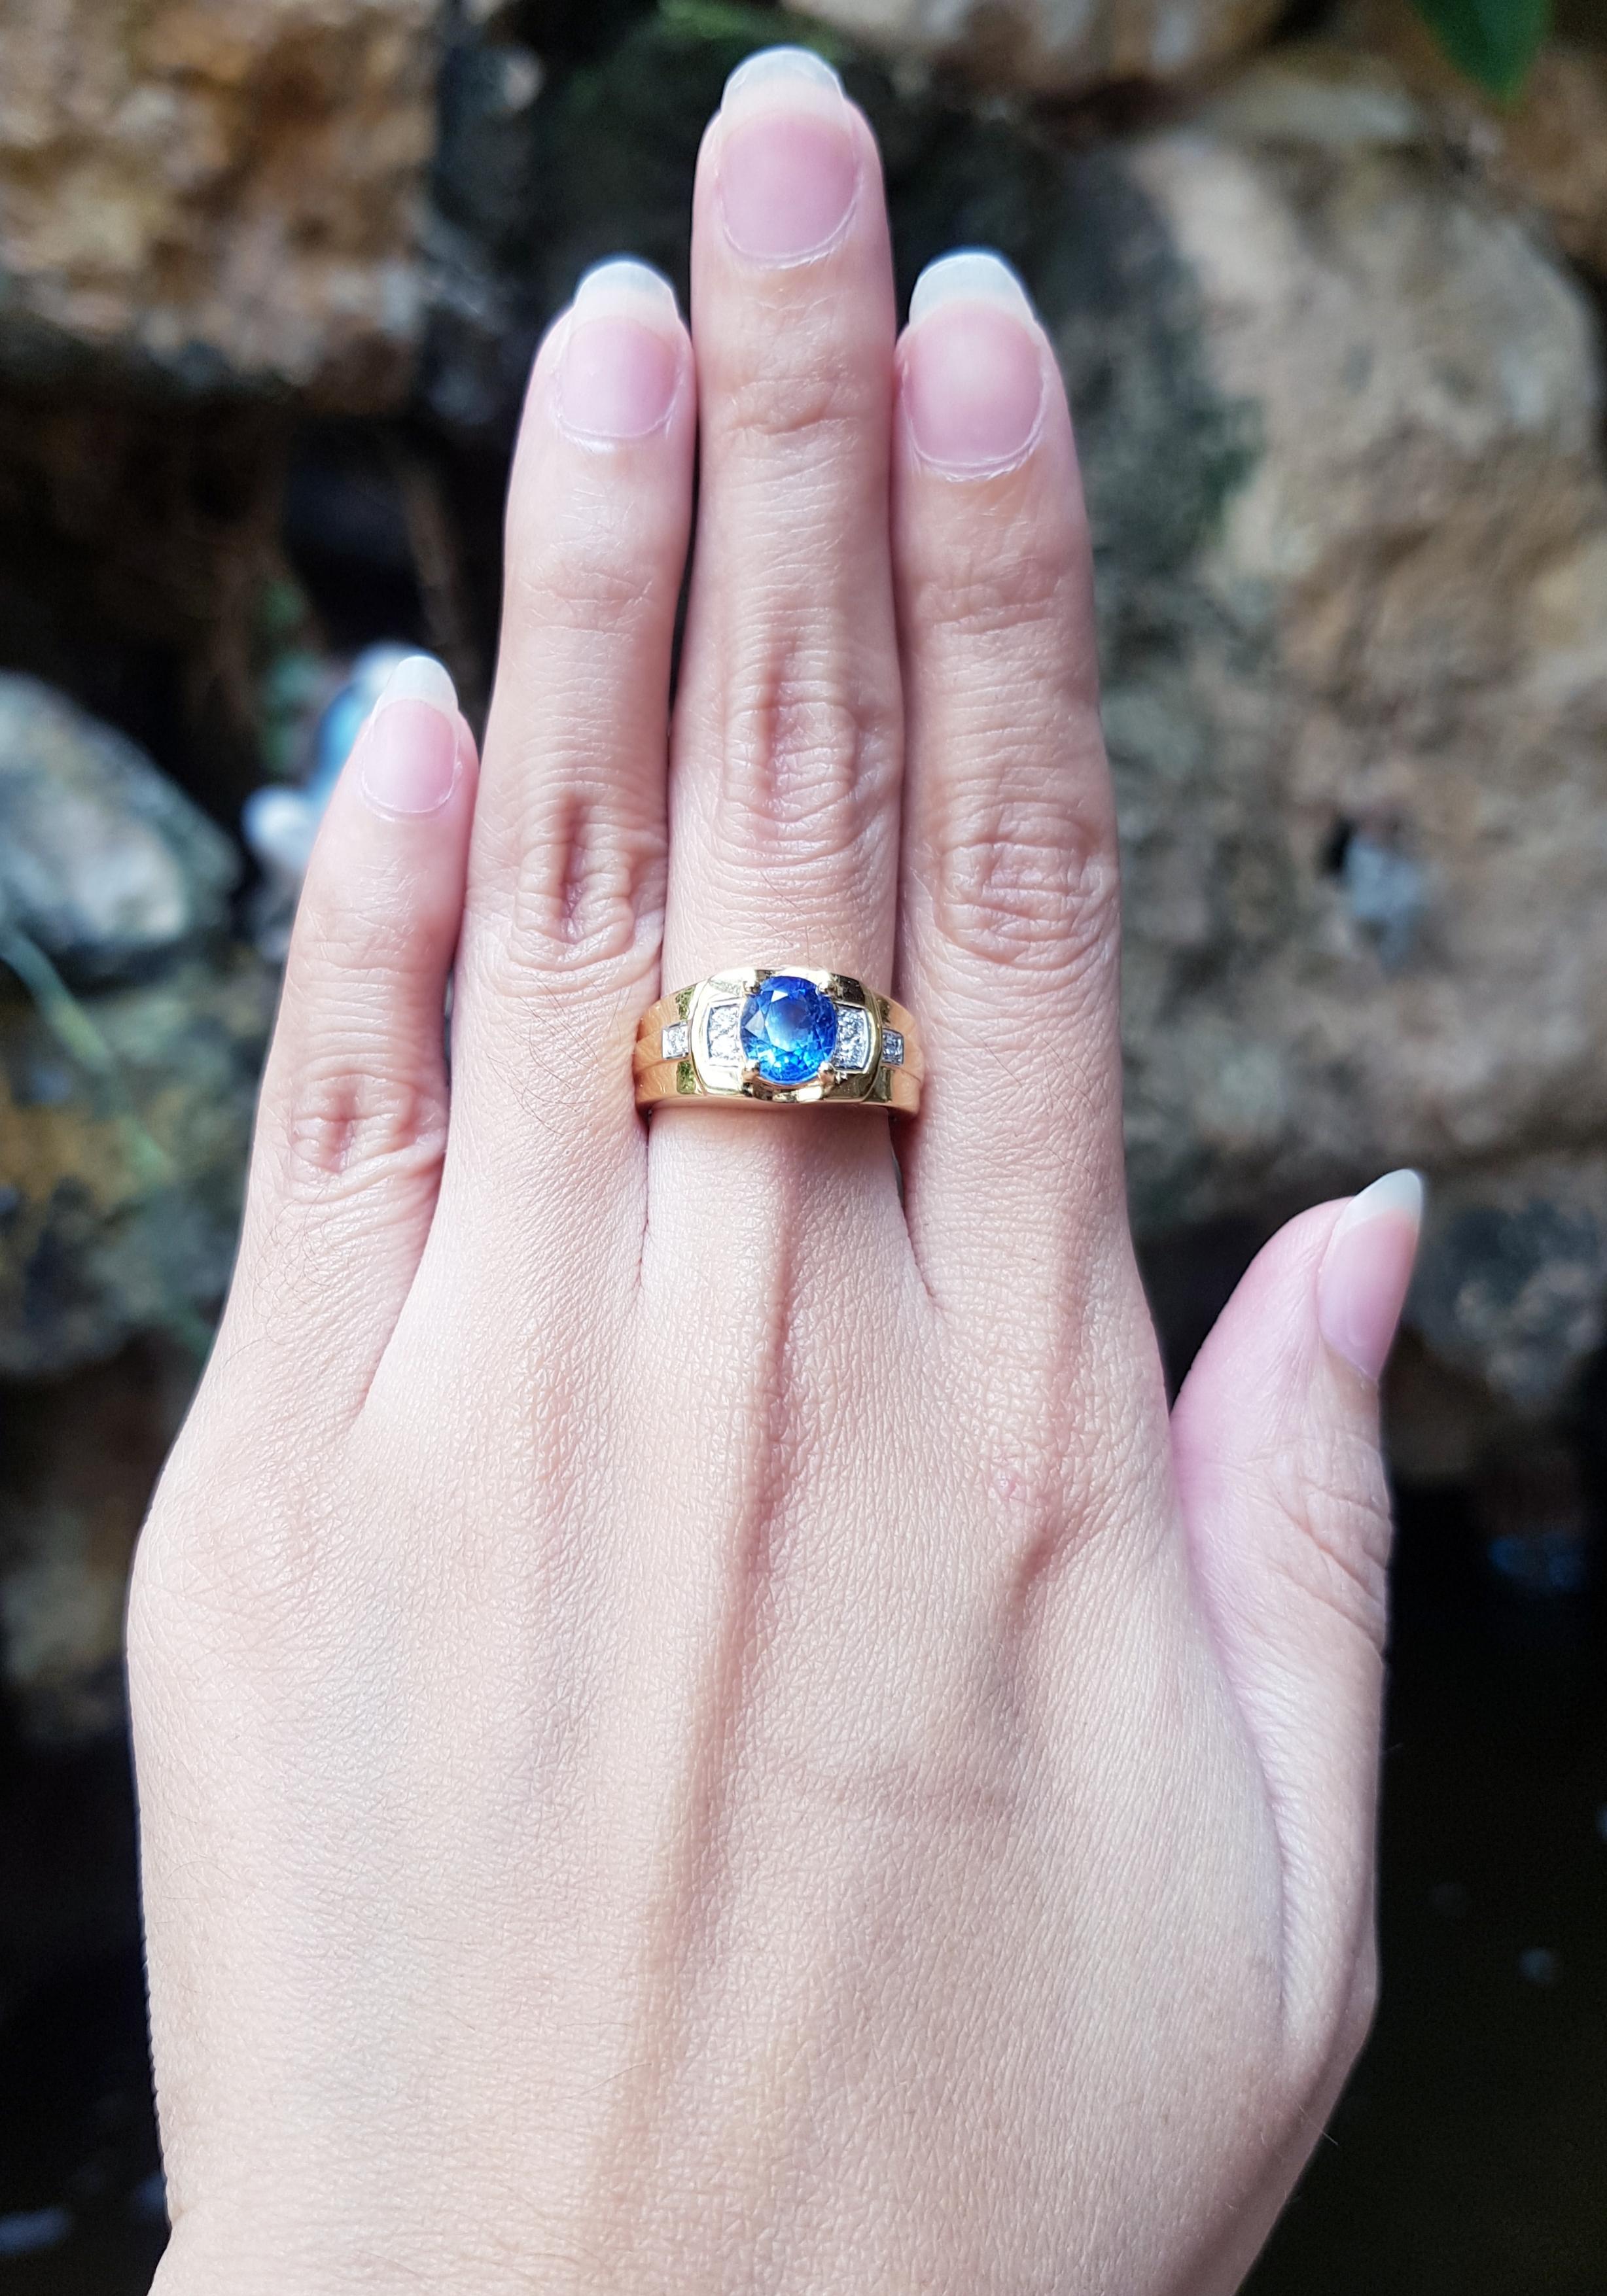 Blue Sapphire 1.94 carats with Diamond 0.11 carat Ring set in 18 Karat Gold Settings

Width: 0.6 cm 
Length: 0.8 cm
Ring Size: 53
Total Weight: 8.06 grams


